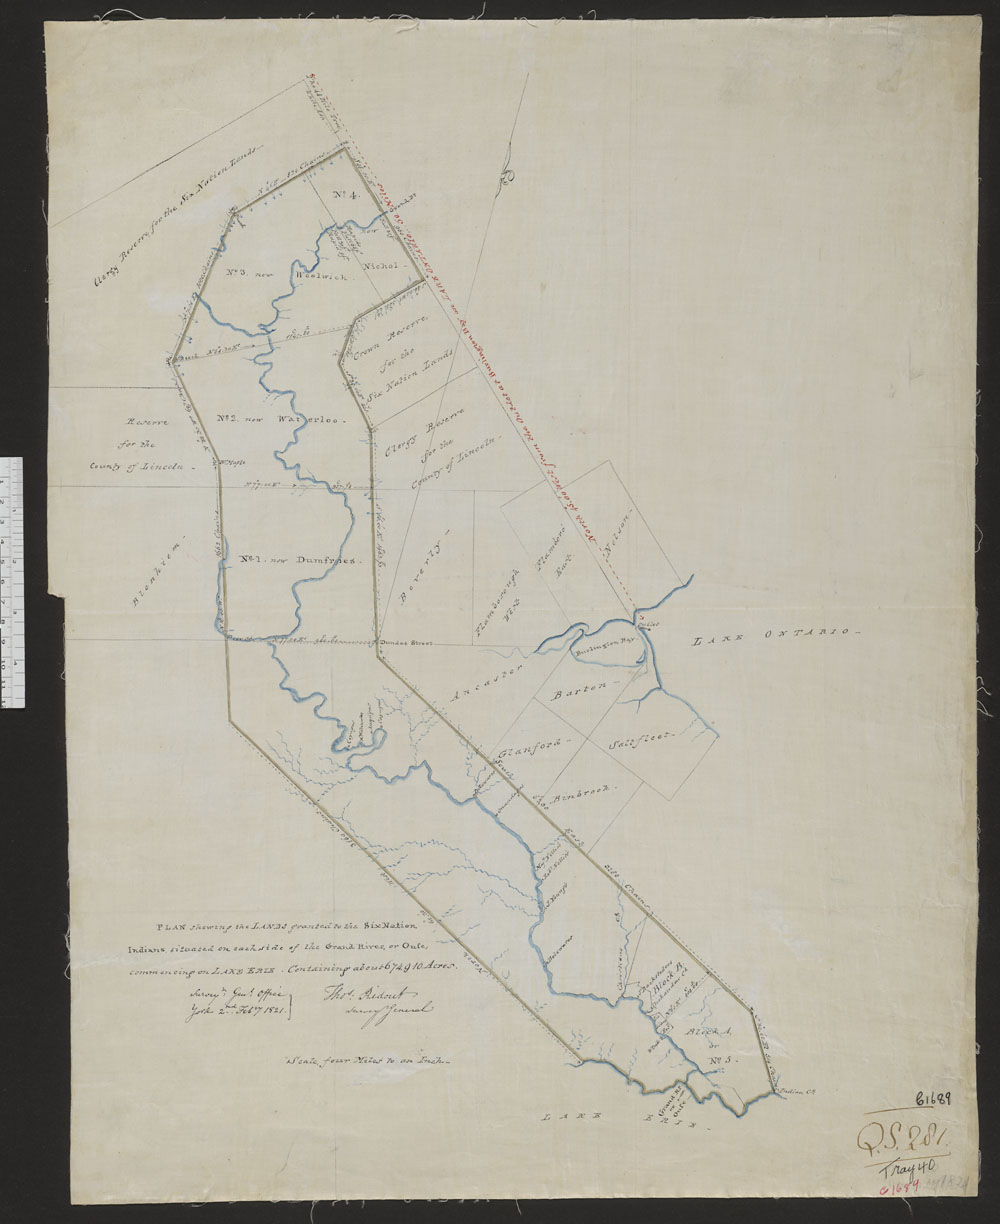 A photo of a hand-drawn "Plan shewing the Lands granted to the Six Nation Indians, situated on each side of the Grand River, or Ouse; commencing on Lake Erie, containing about 674,910 Acres,” Thomas Ridout, Office of the Surveyor General, 1821. (Courtesy: Library and Archives Canada)